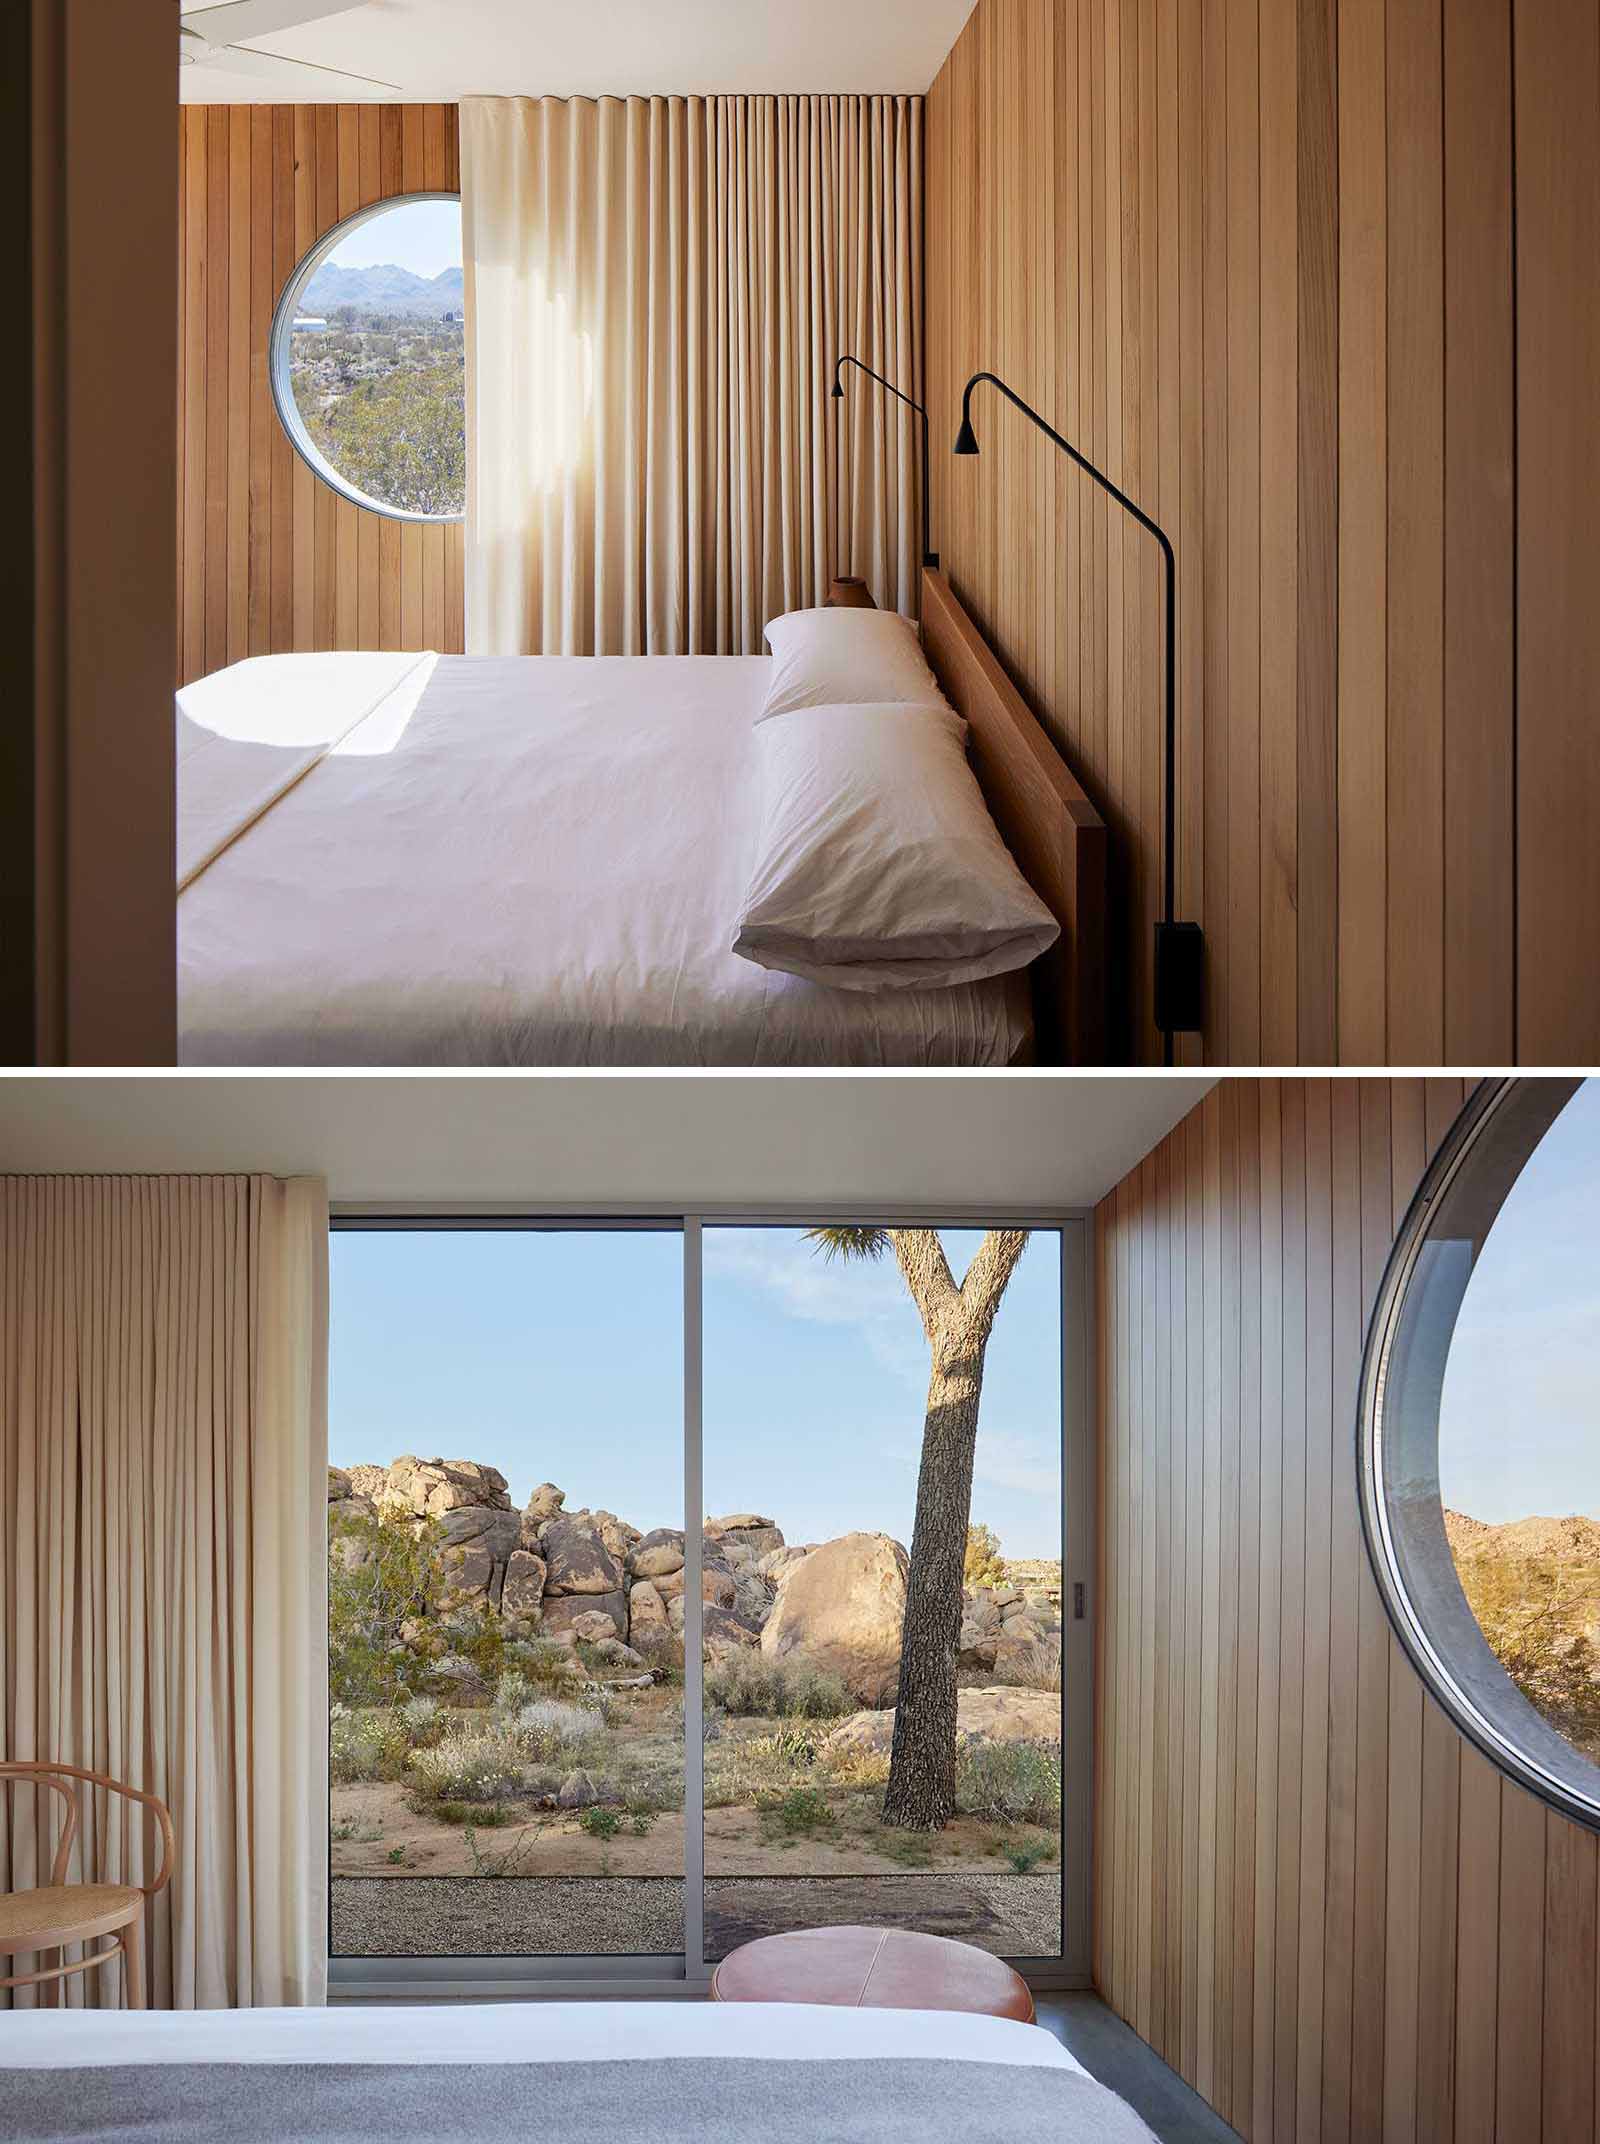 This modern bedroom includes a uniquely-designed round window, while cedar wall paneling covers the walls.